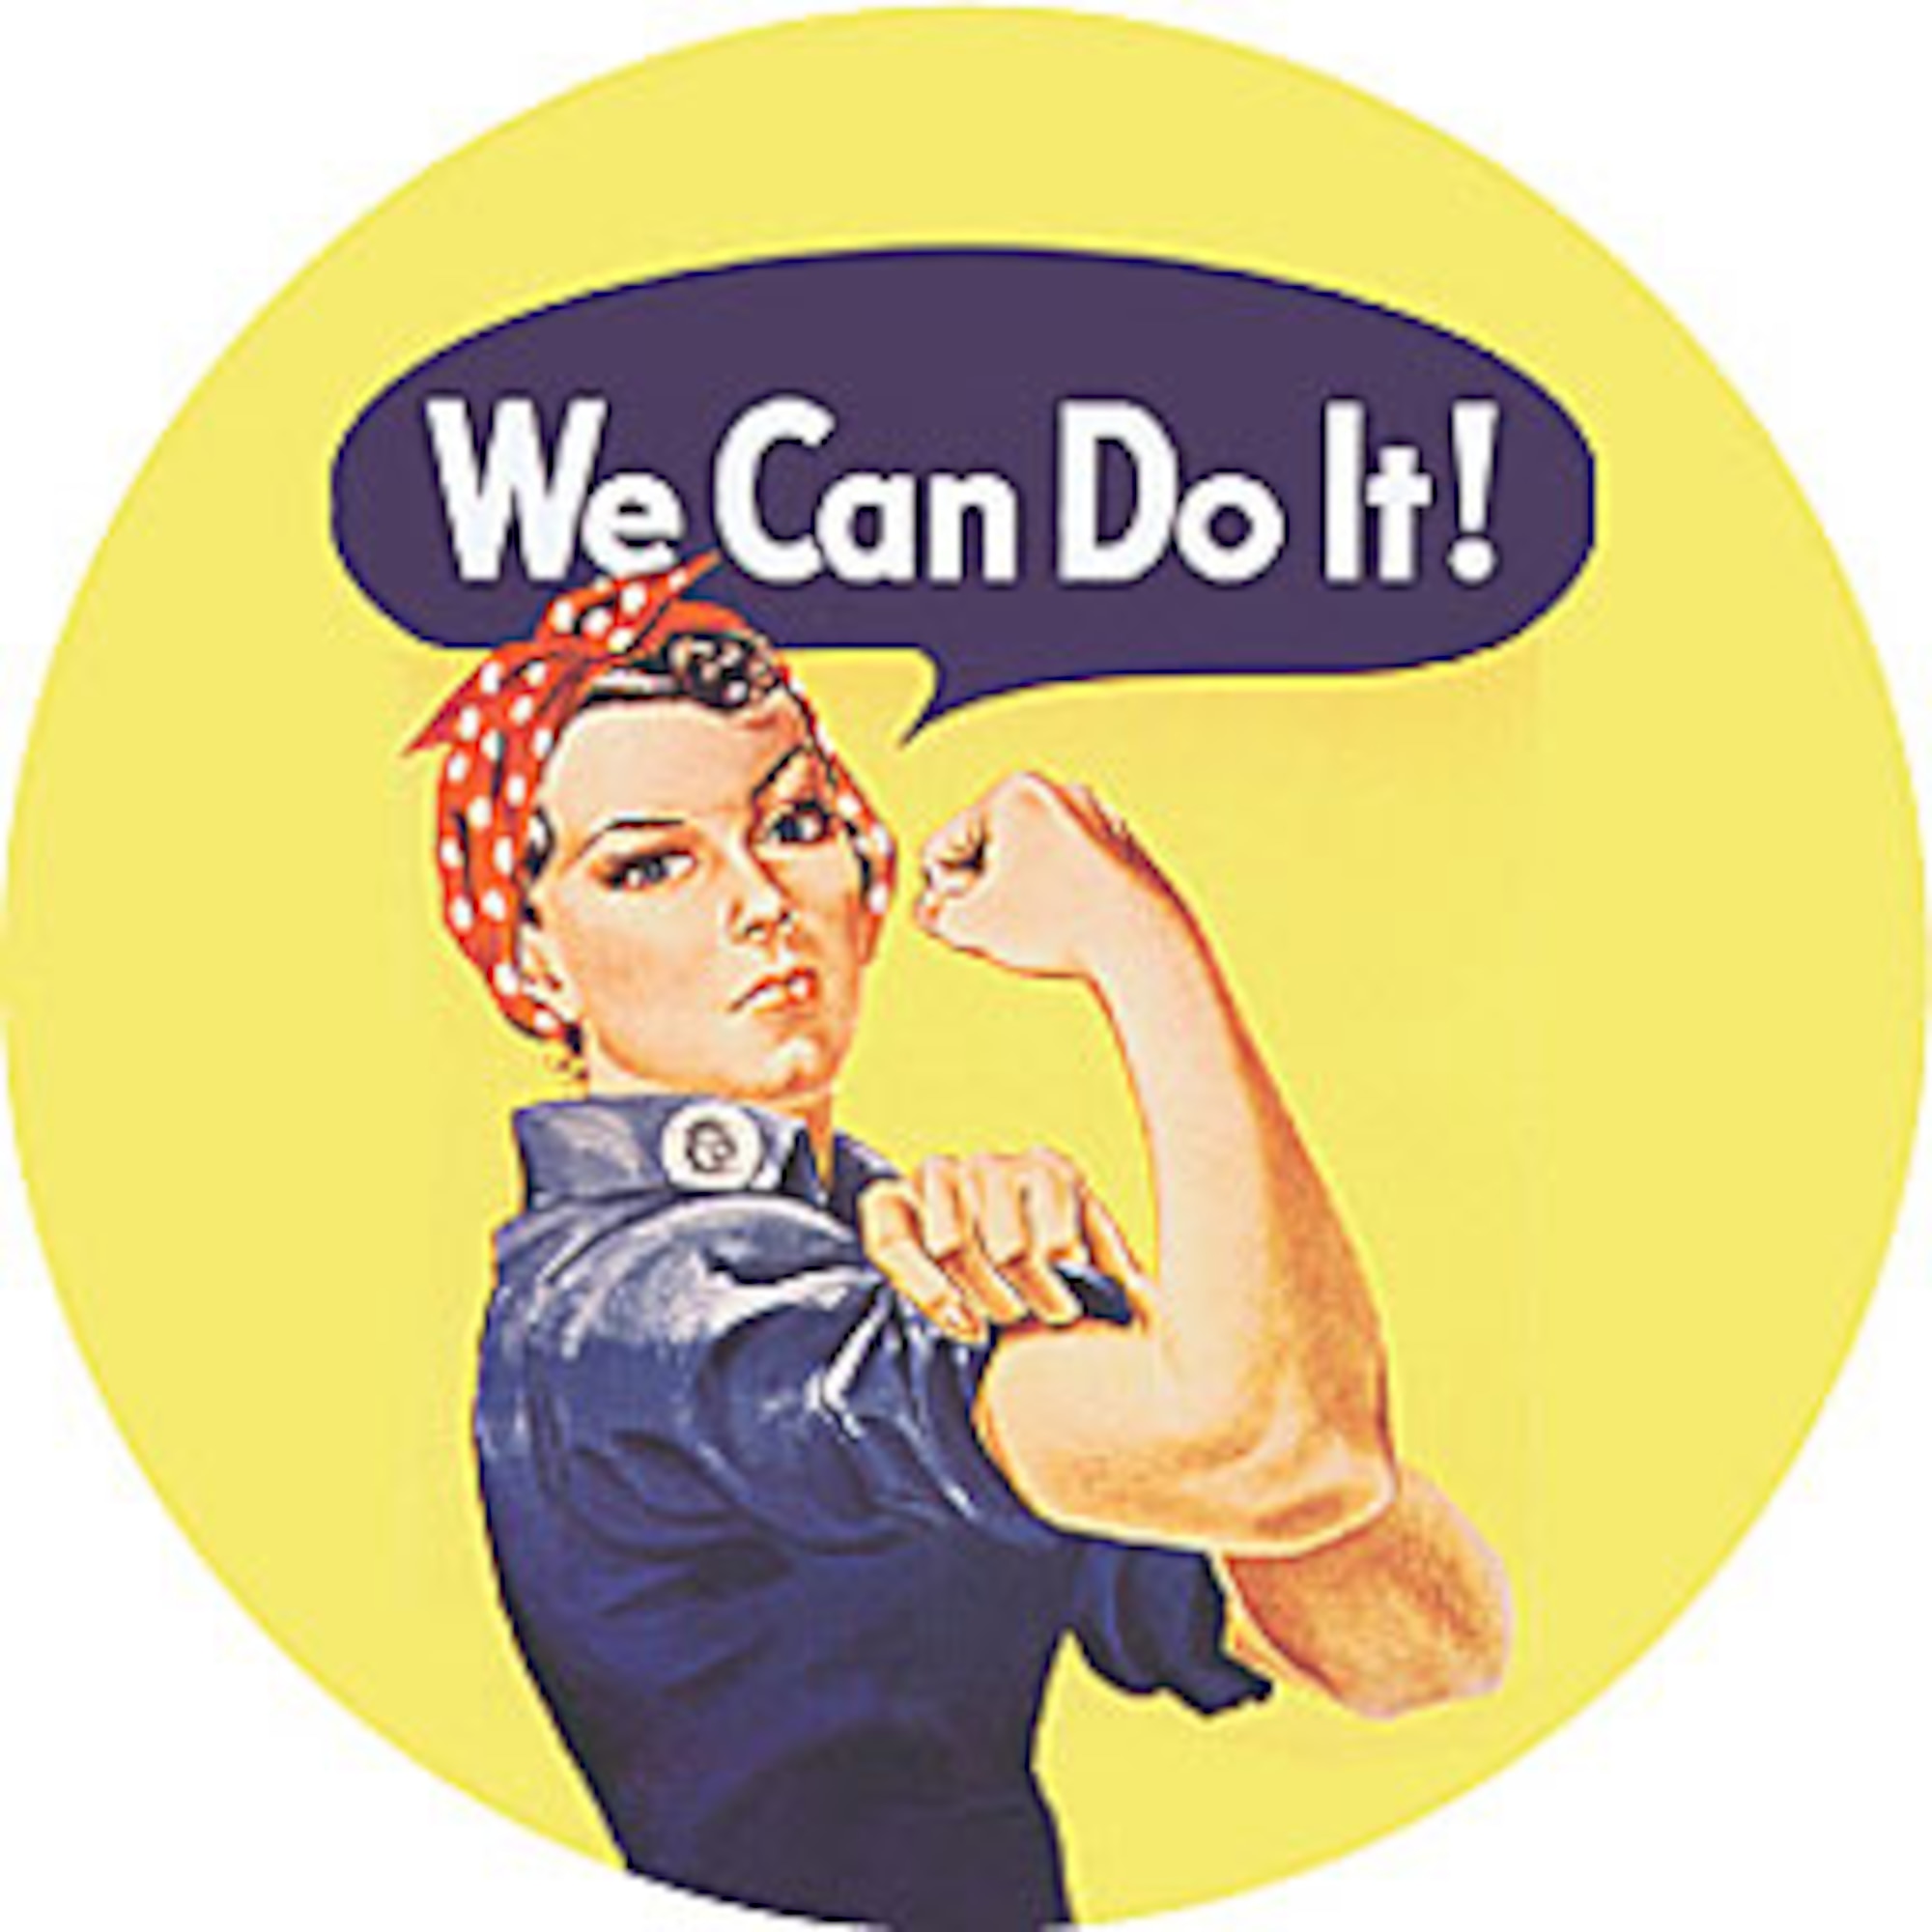 Rosie the Riveter is a cultural icon of the United States, representing the American women who worked in factories during World War II, many of whom produced munitions and war supplies.